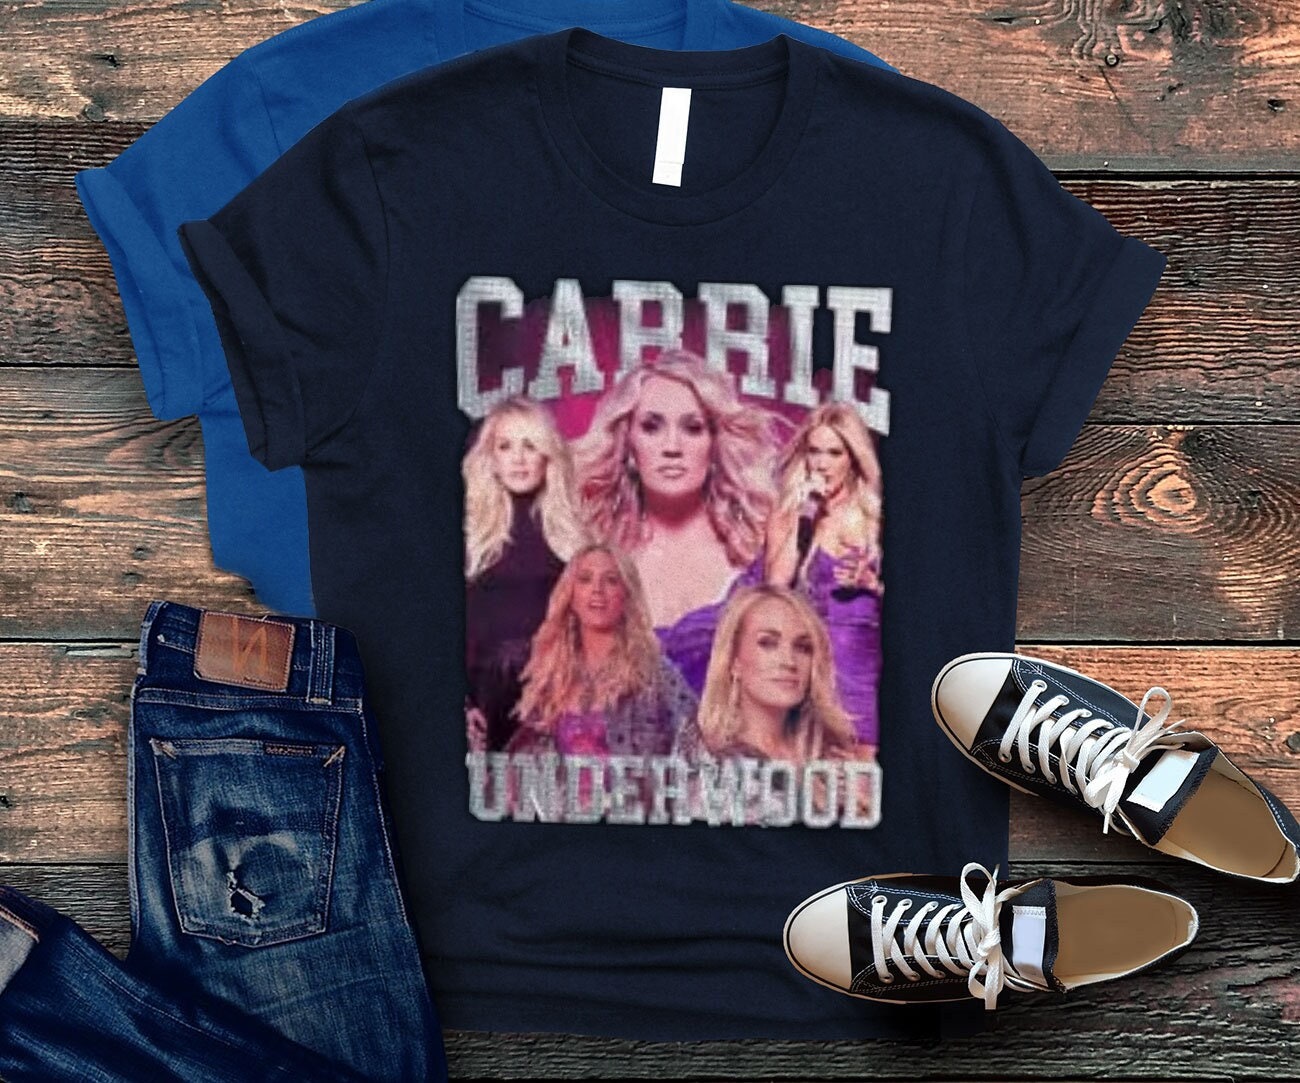 Discover Carrie Underwood Denim and Rhinestones Tour 2023 Shirt, Carrie Underwood T-shirt